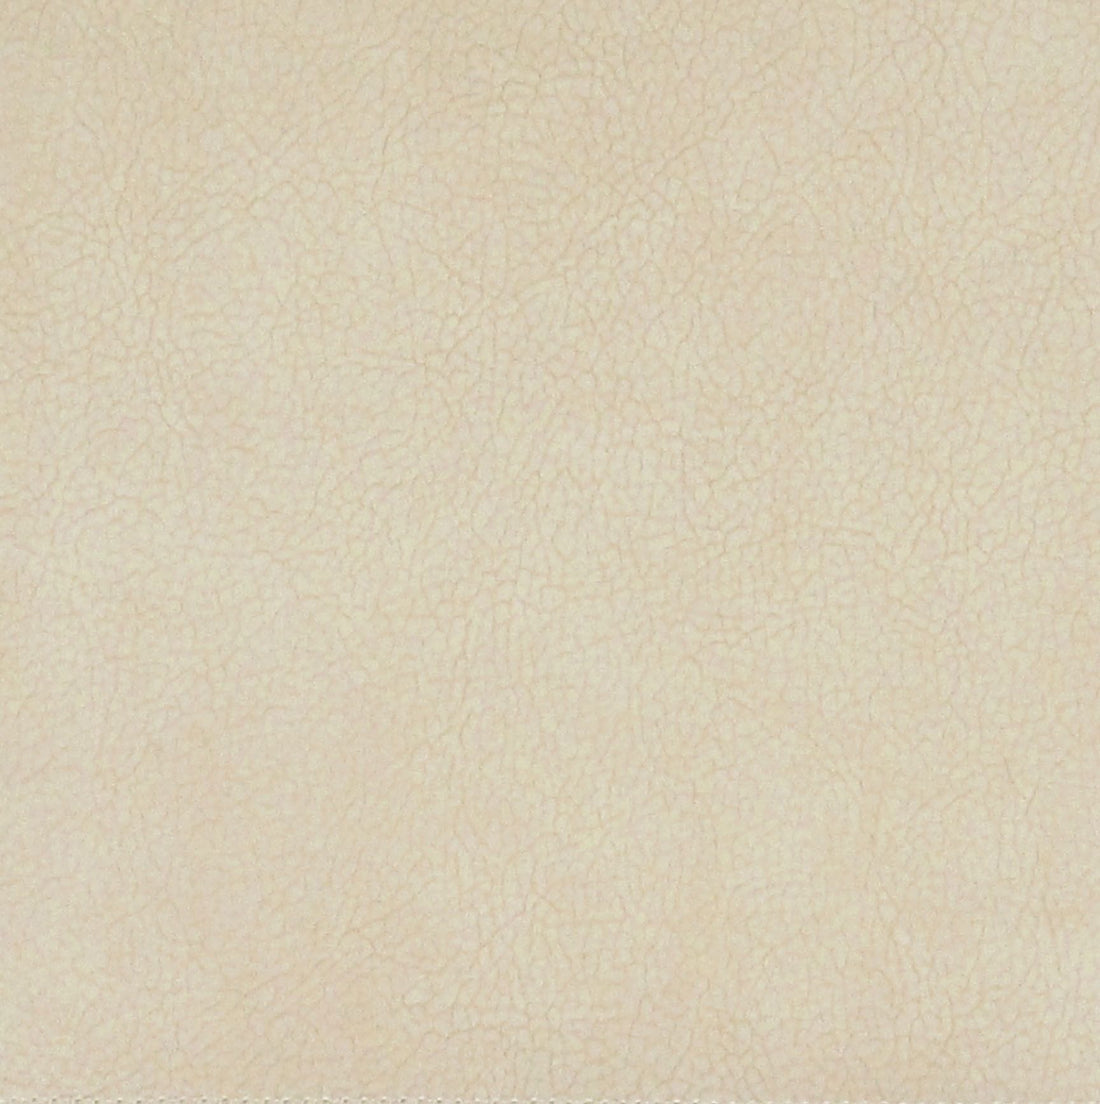 Georgia Suede fabric in macadamia color - pattern number H6 37435937 - by Scalamandre in the Old World Weavers collection